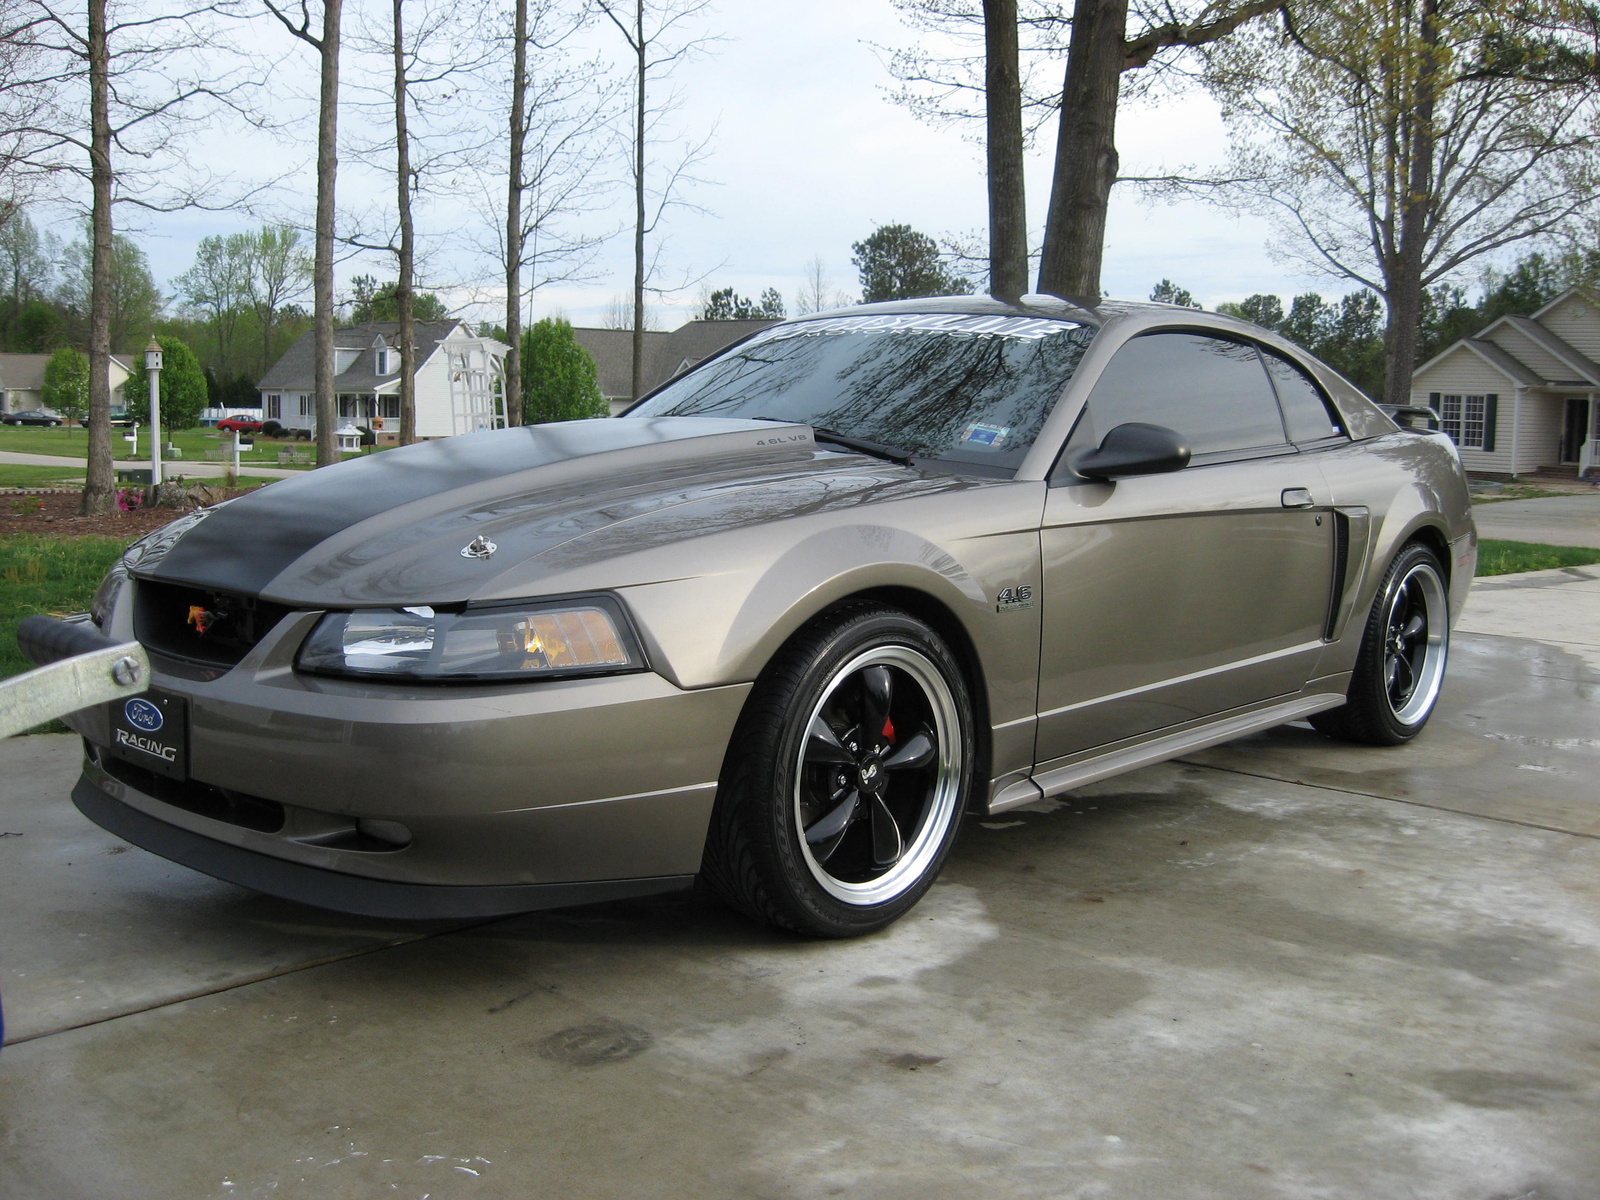 2002 Ford mustang gt deluxe specs #3